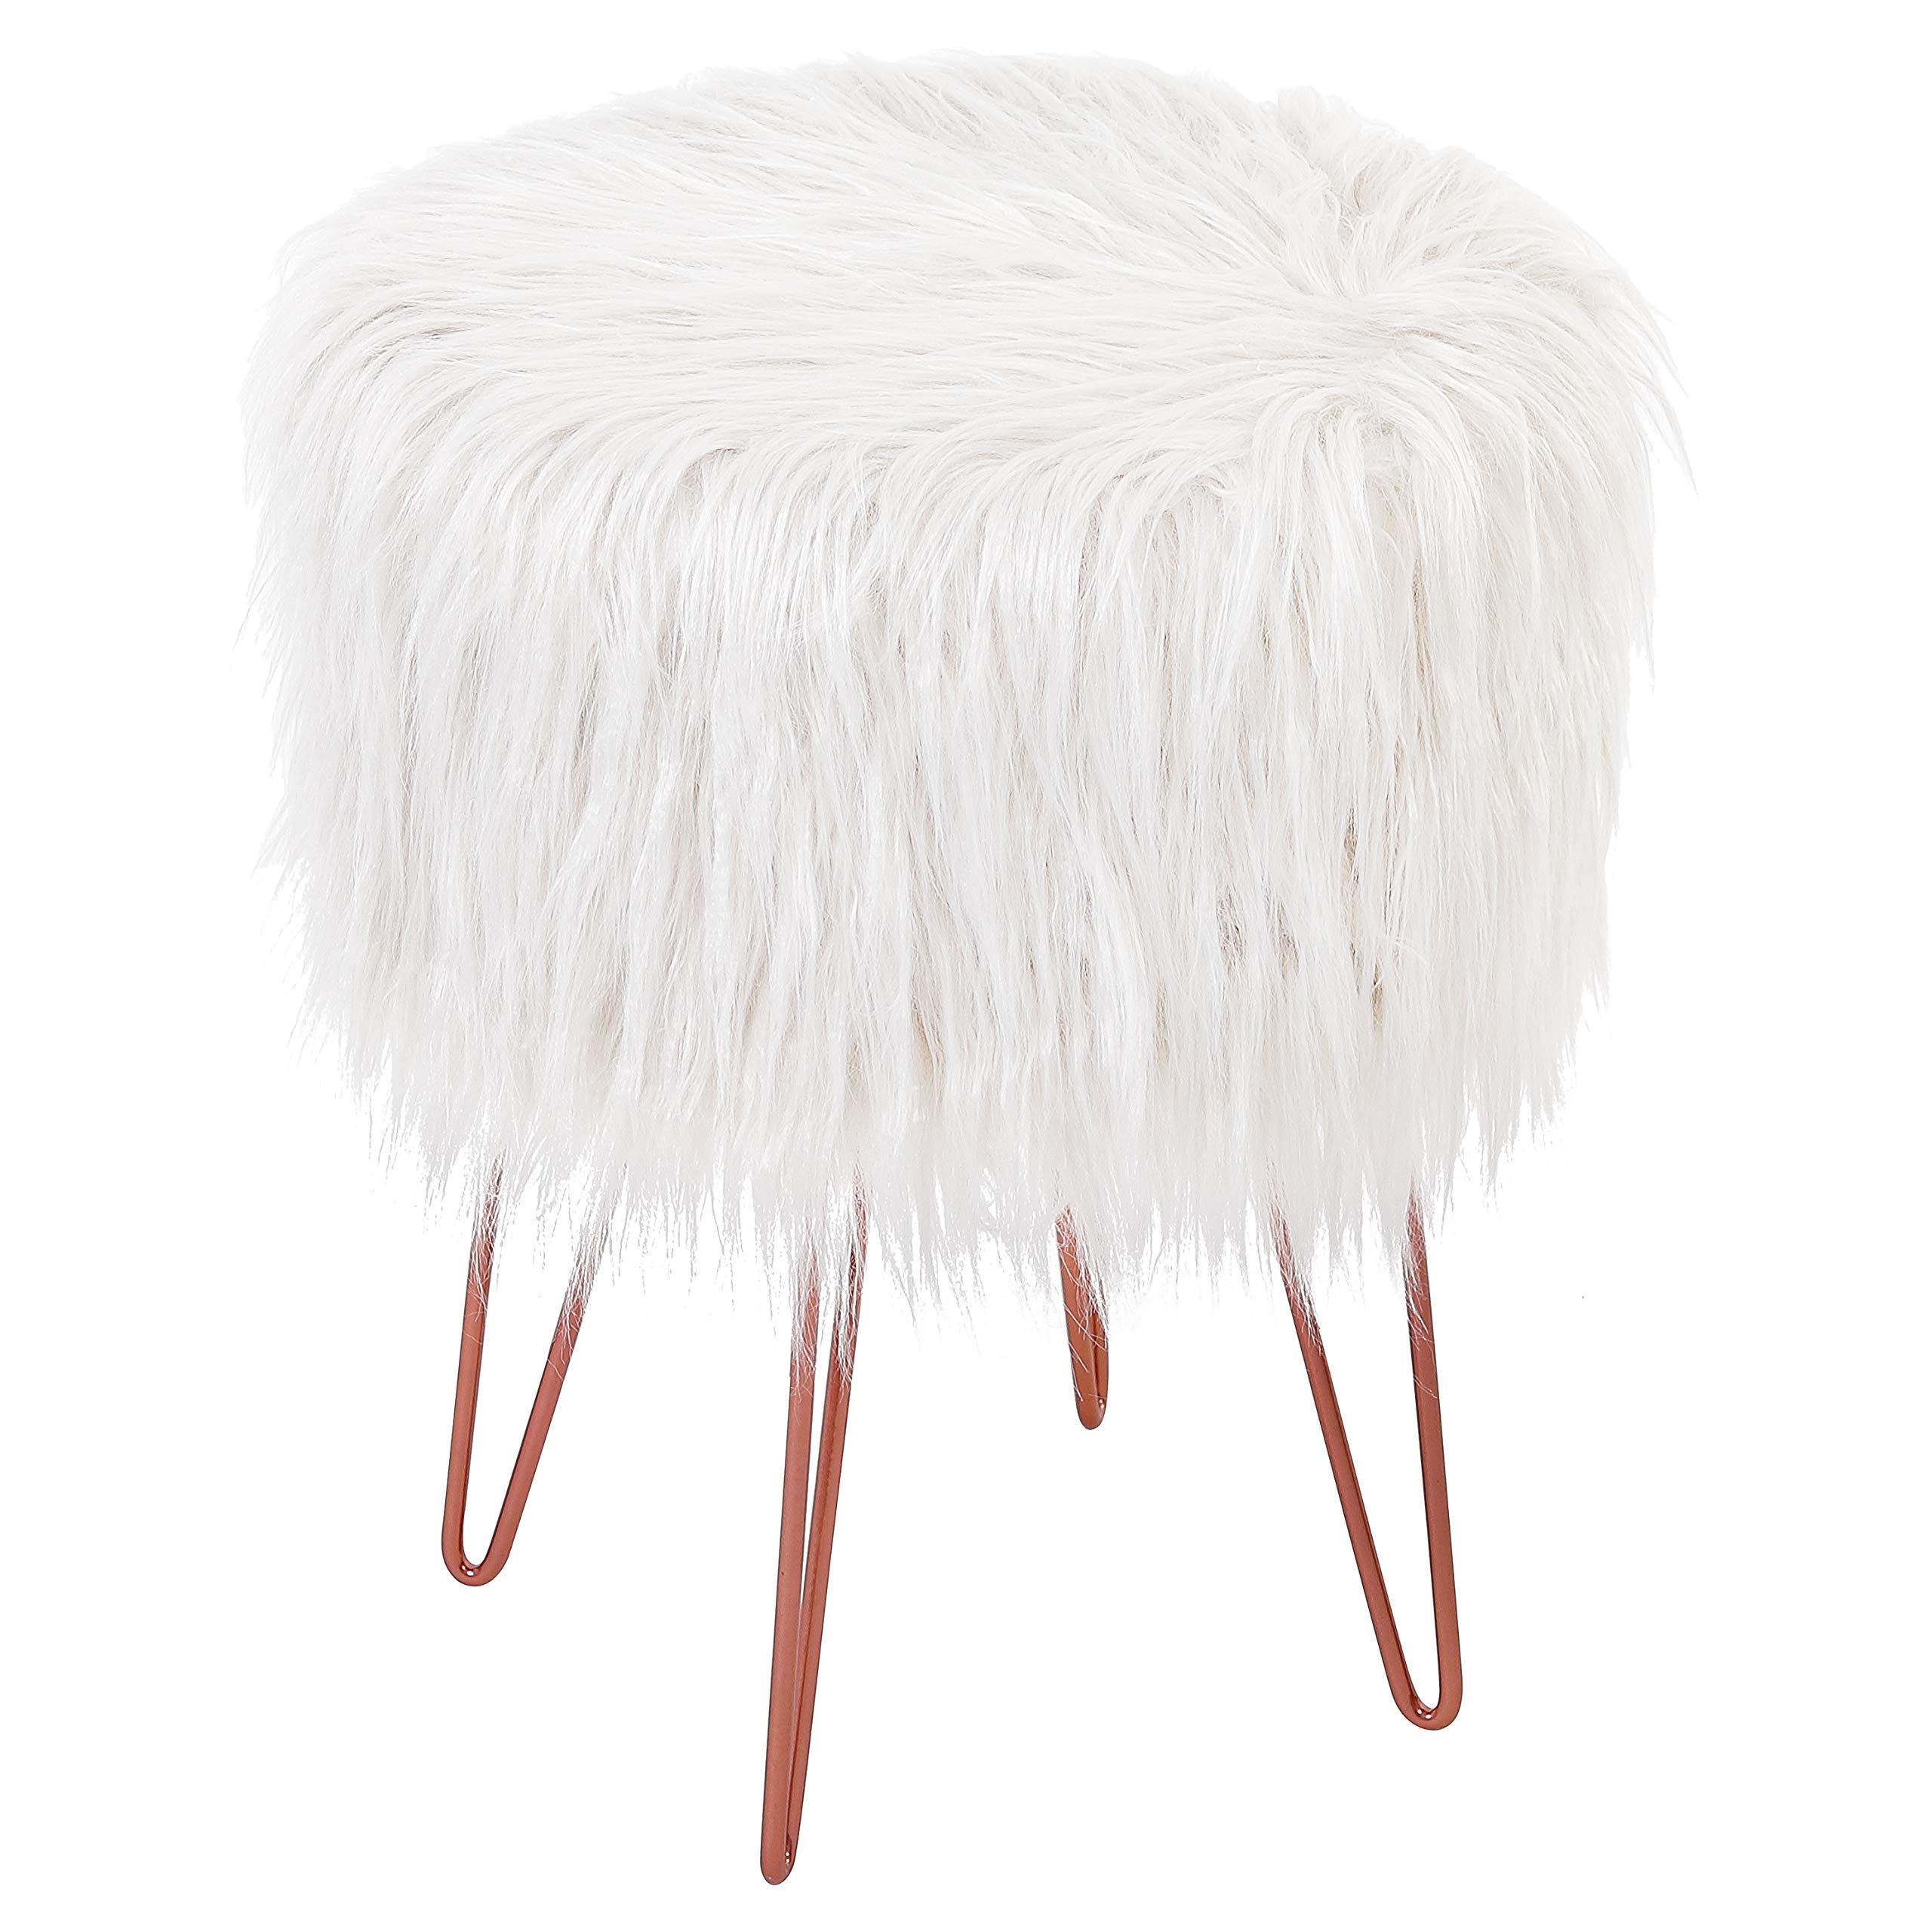 BIRDROCK HOME White Faux Fur Vanity Stool Chair – Soft Furry Compact Padded Seat - Vanity, Living Ro | Amazon (US)